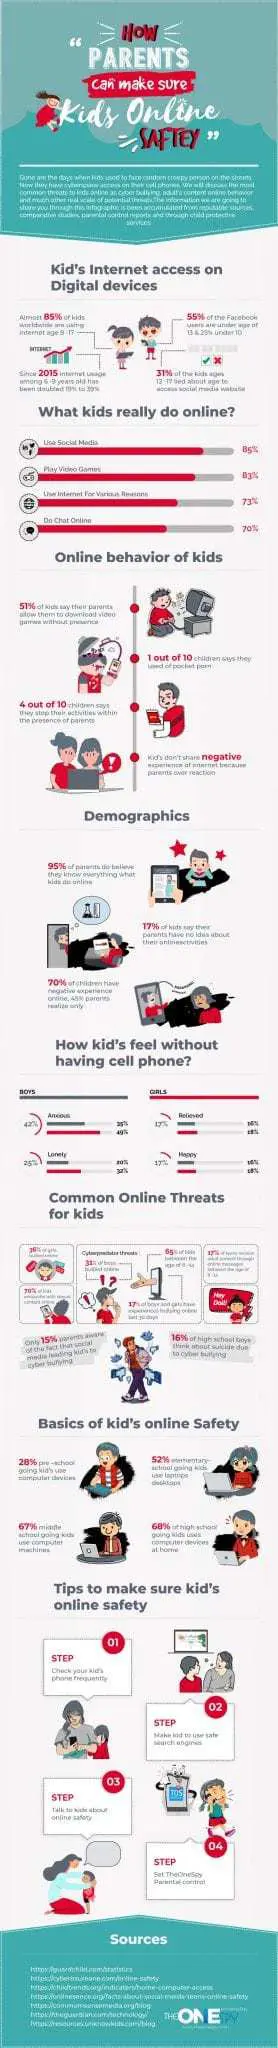 How Parents can Make Sure Kid’s Online Safety – Infographic